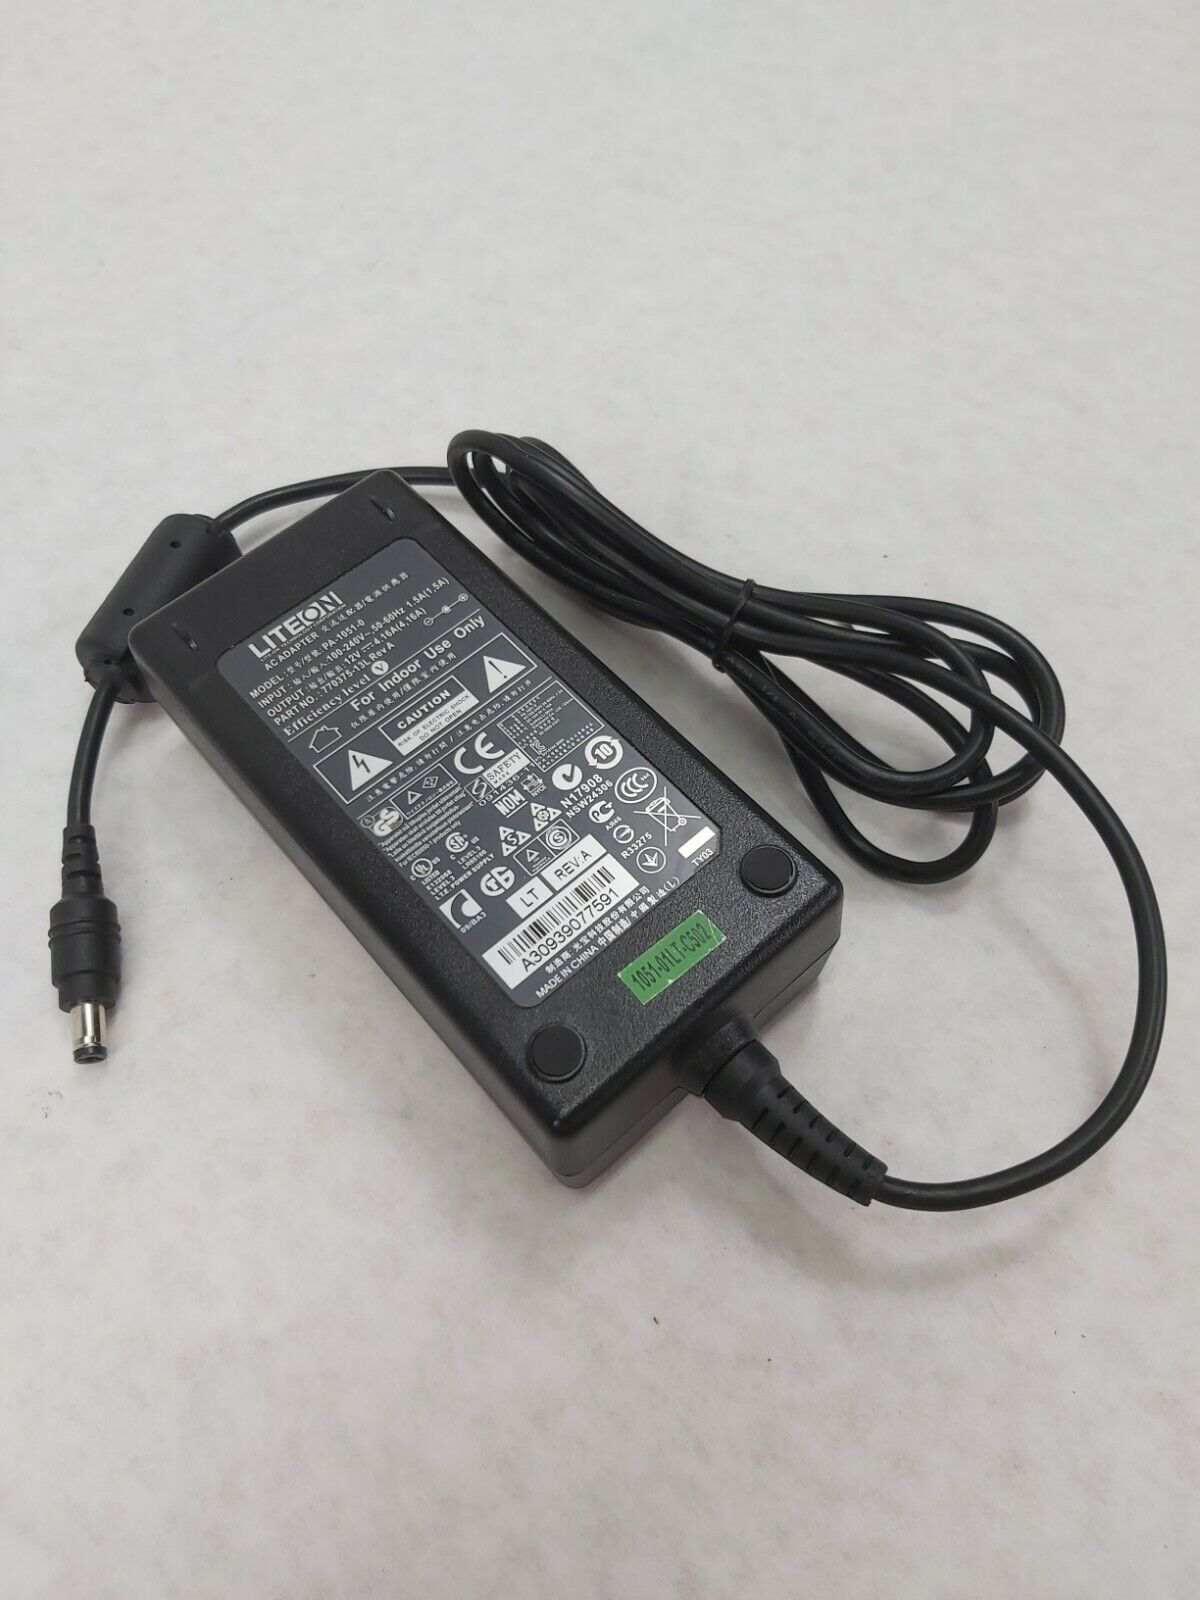 Liteon Power Supply AC Adapter PA-1051-0 770375-13L 60W 12V 4.16A UNTESTED